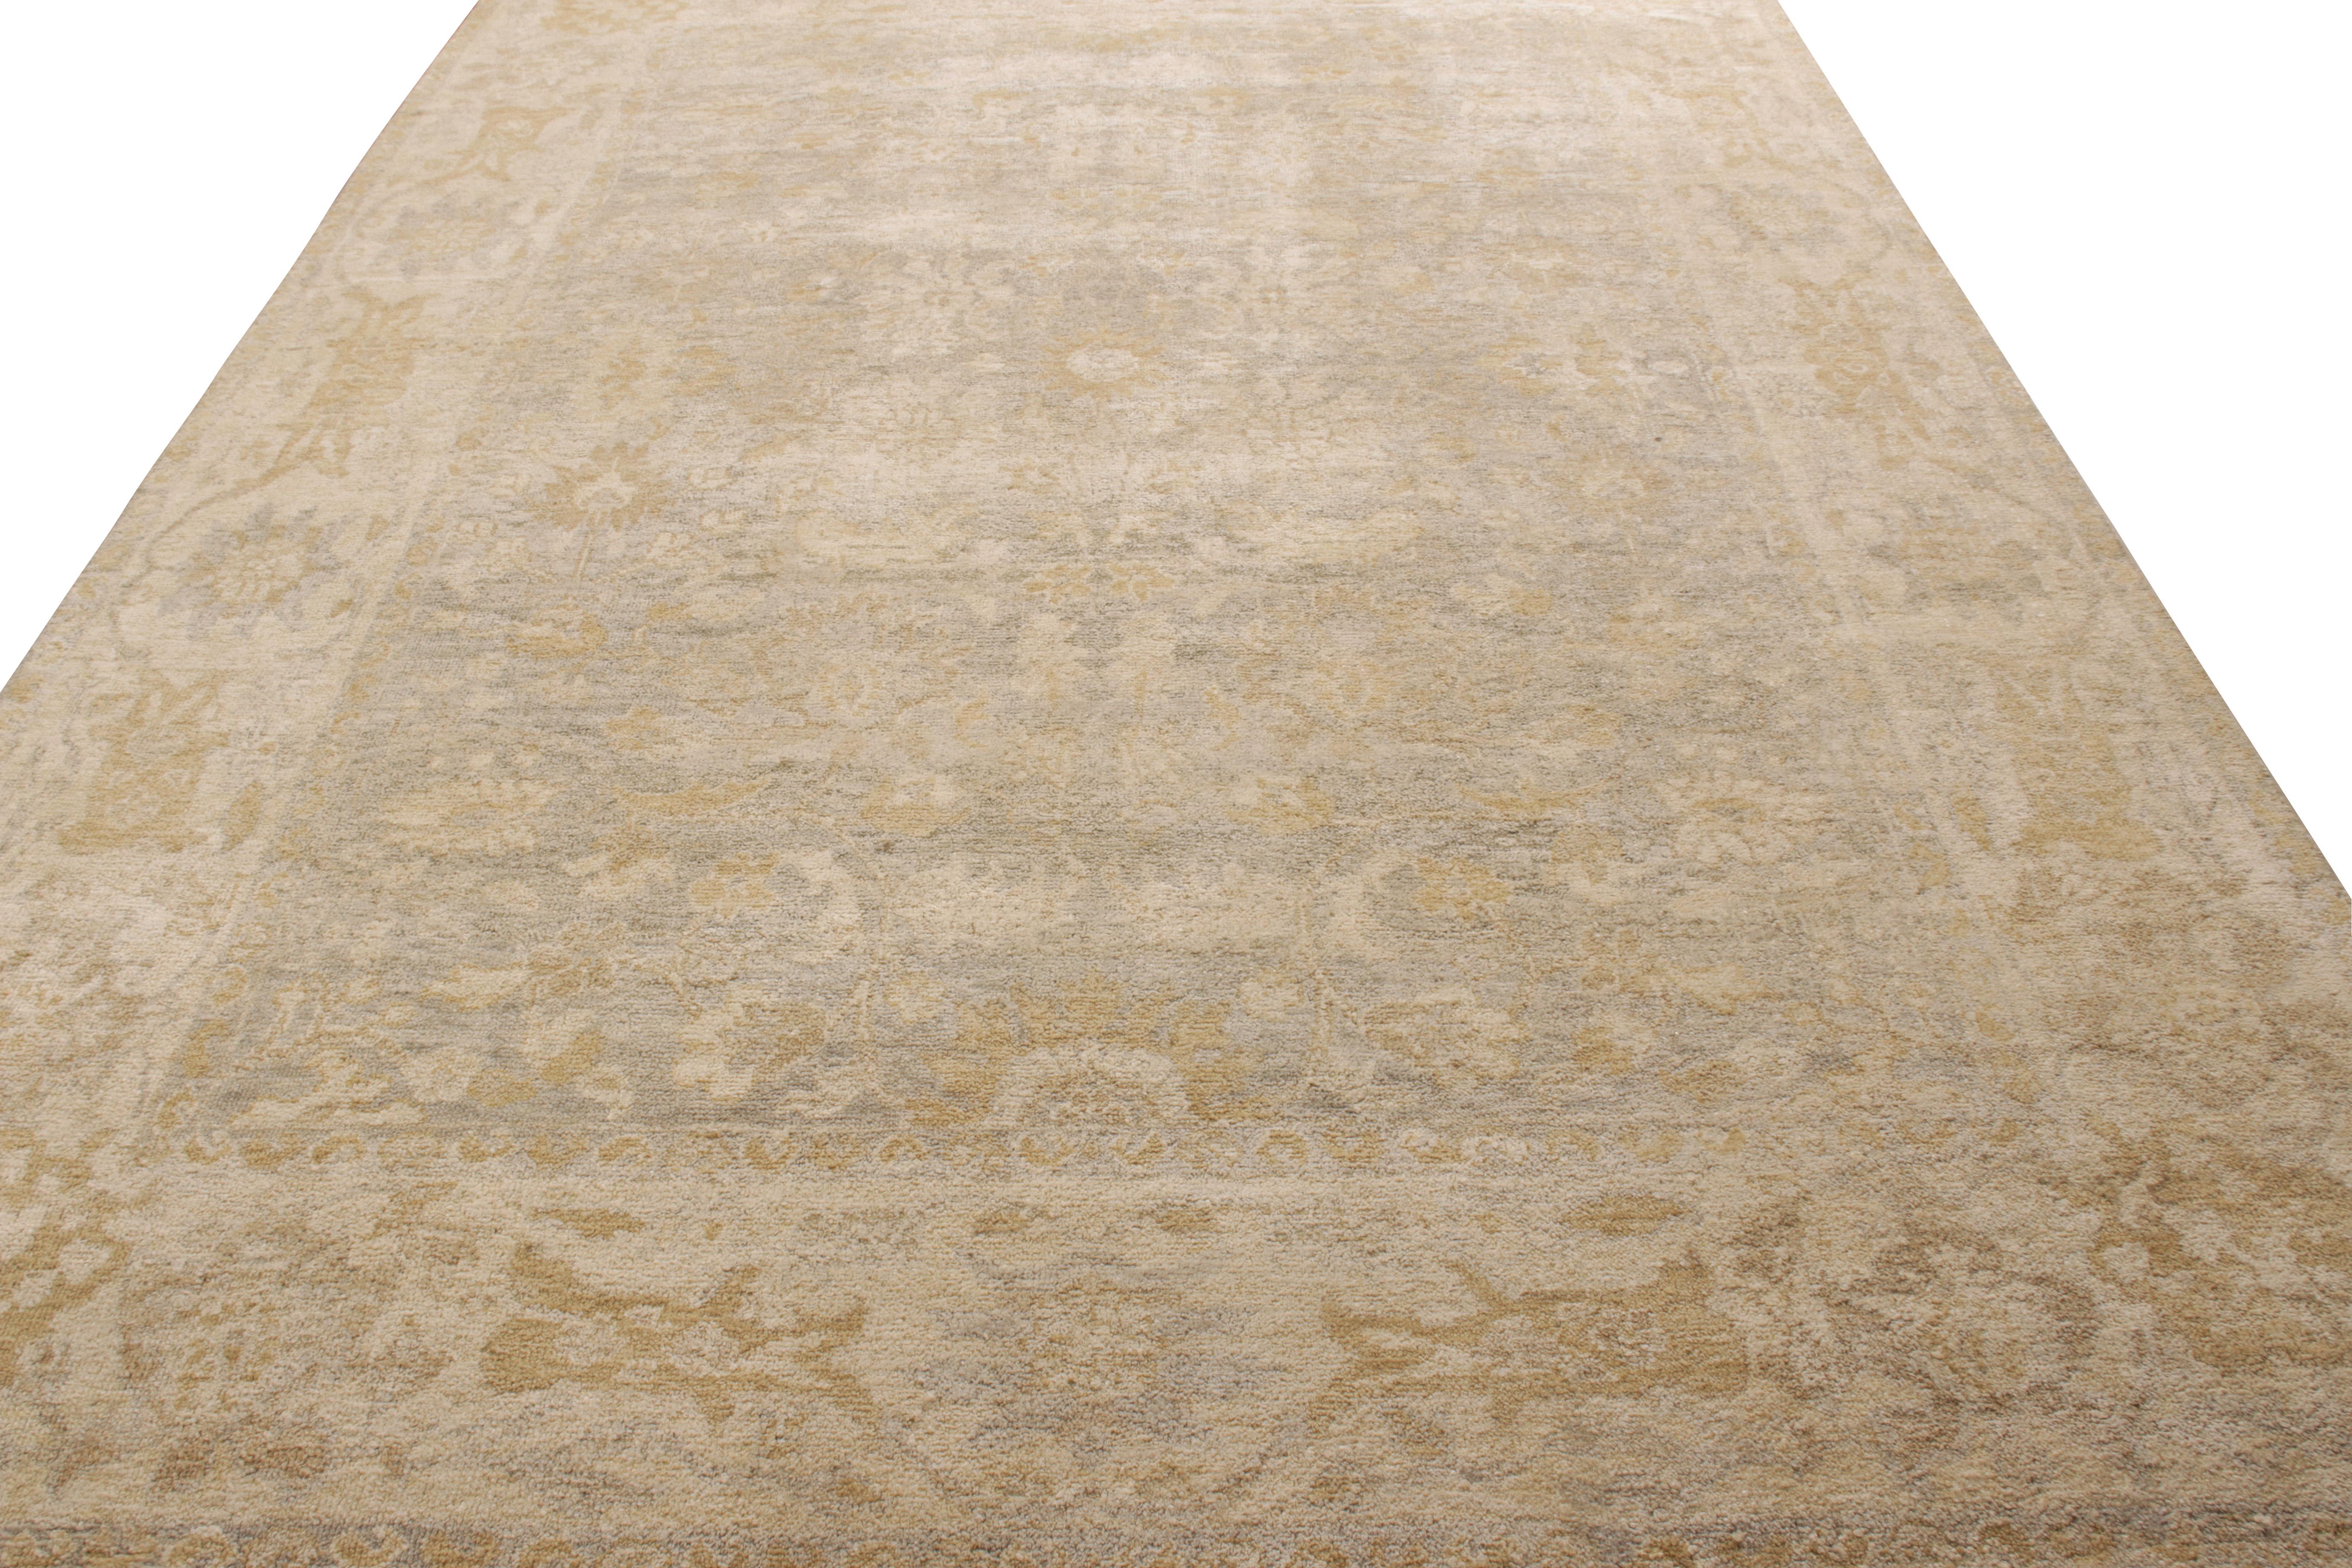 A 9 x 12 ode to celebrated transitional rug styles, from Rug & Kilim’s distinguished Modern Classics Collection. Hand knotted in our proprietary yarn blending wool and silk, enjoying a fantastic, forgiving beige-brown colorway complemented by subtle